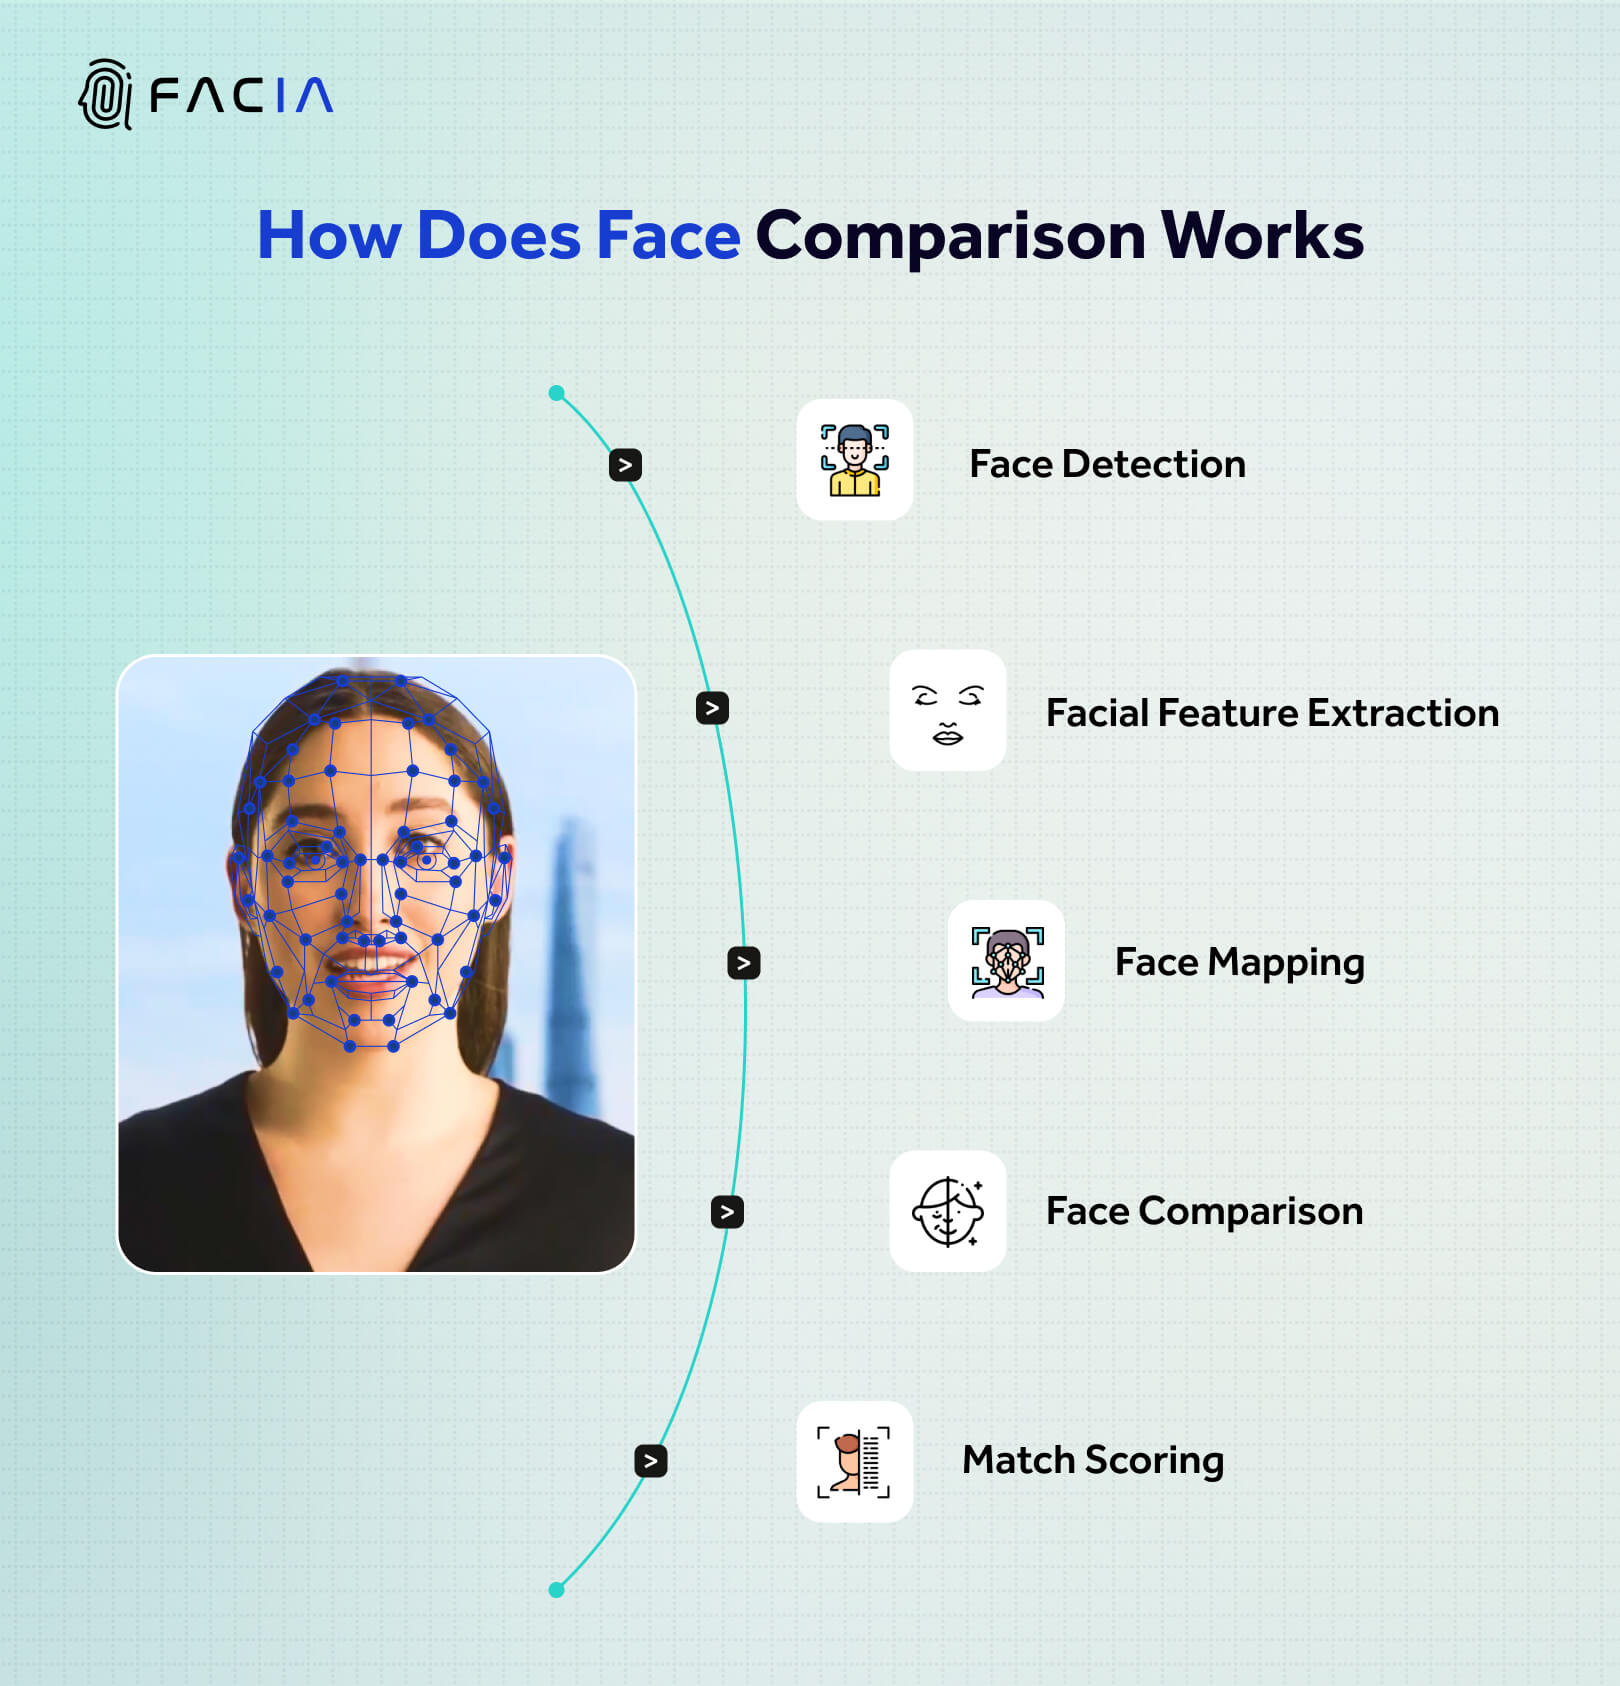 The image shows a step-by-step visual illustration of how face comparison technology works. It includes: 1) Face Detection 2) Facial feature Extraction 3) Face Mapping 4) Face Comparison 5) Match Scoring